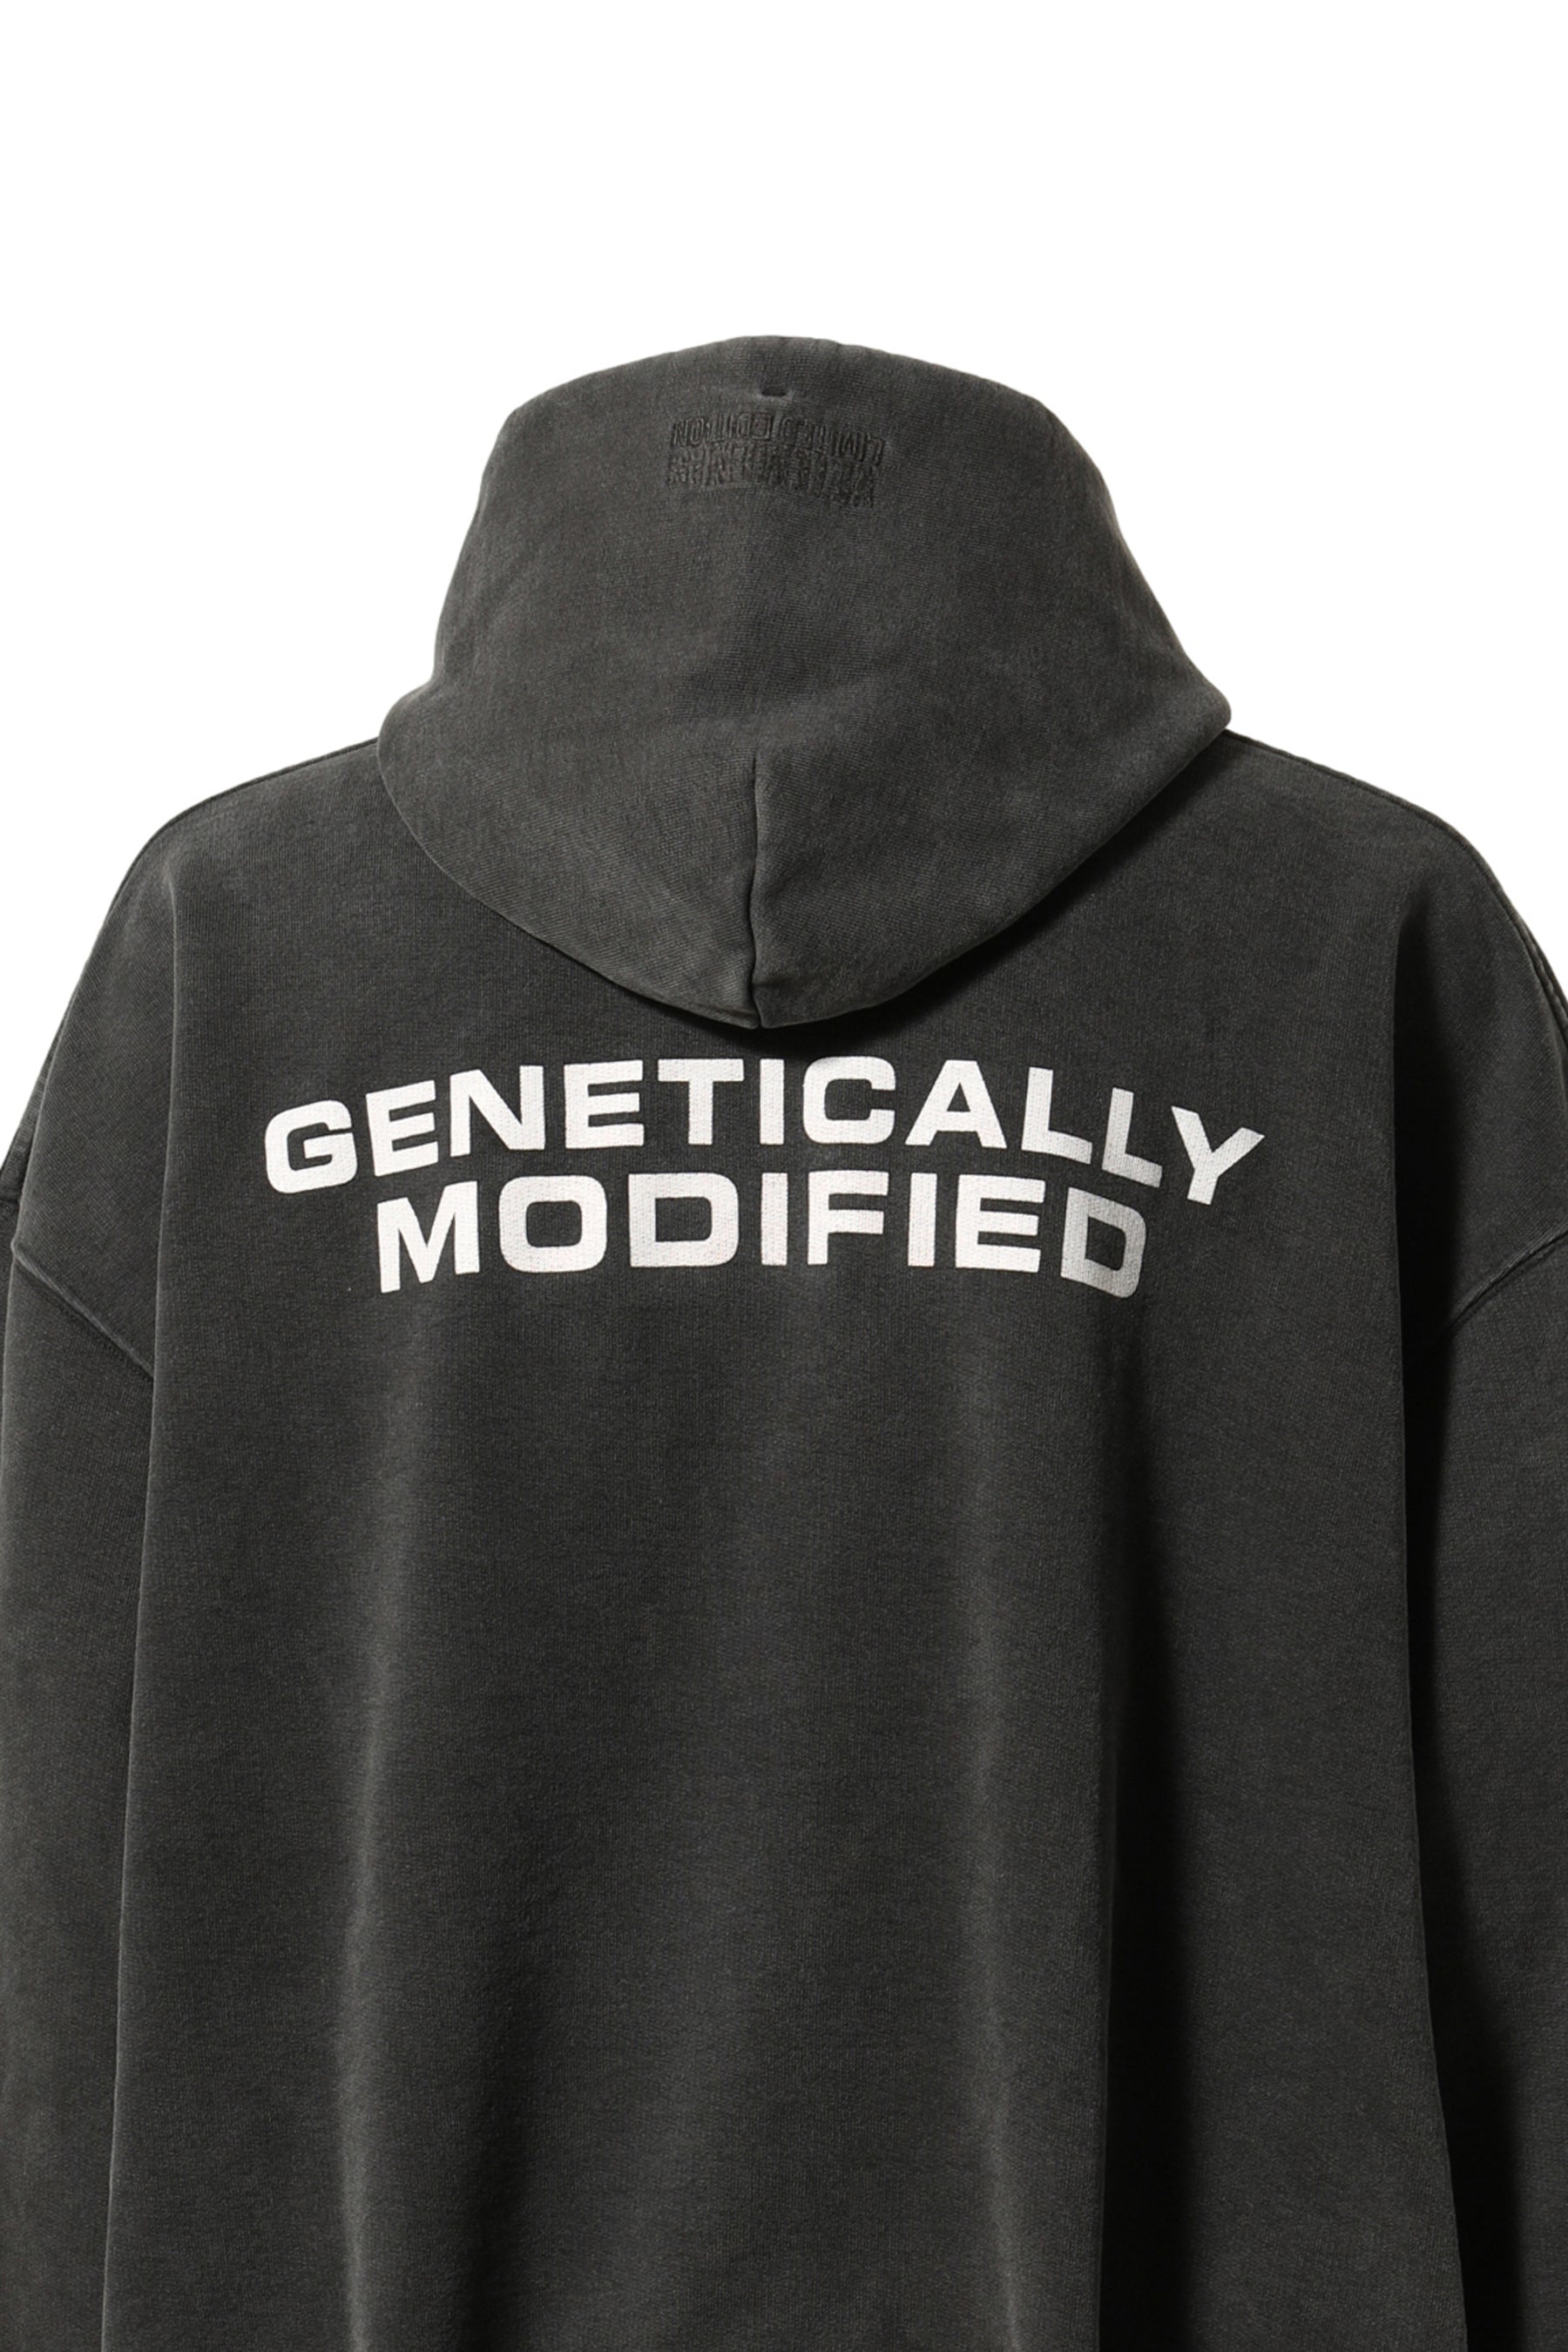 VETEMENTS ヴェトモン FW23 GENETICALLY MODIFIED HOODIE / WASHED BLK